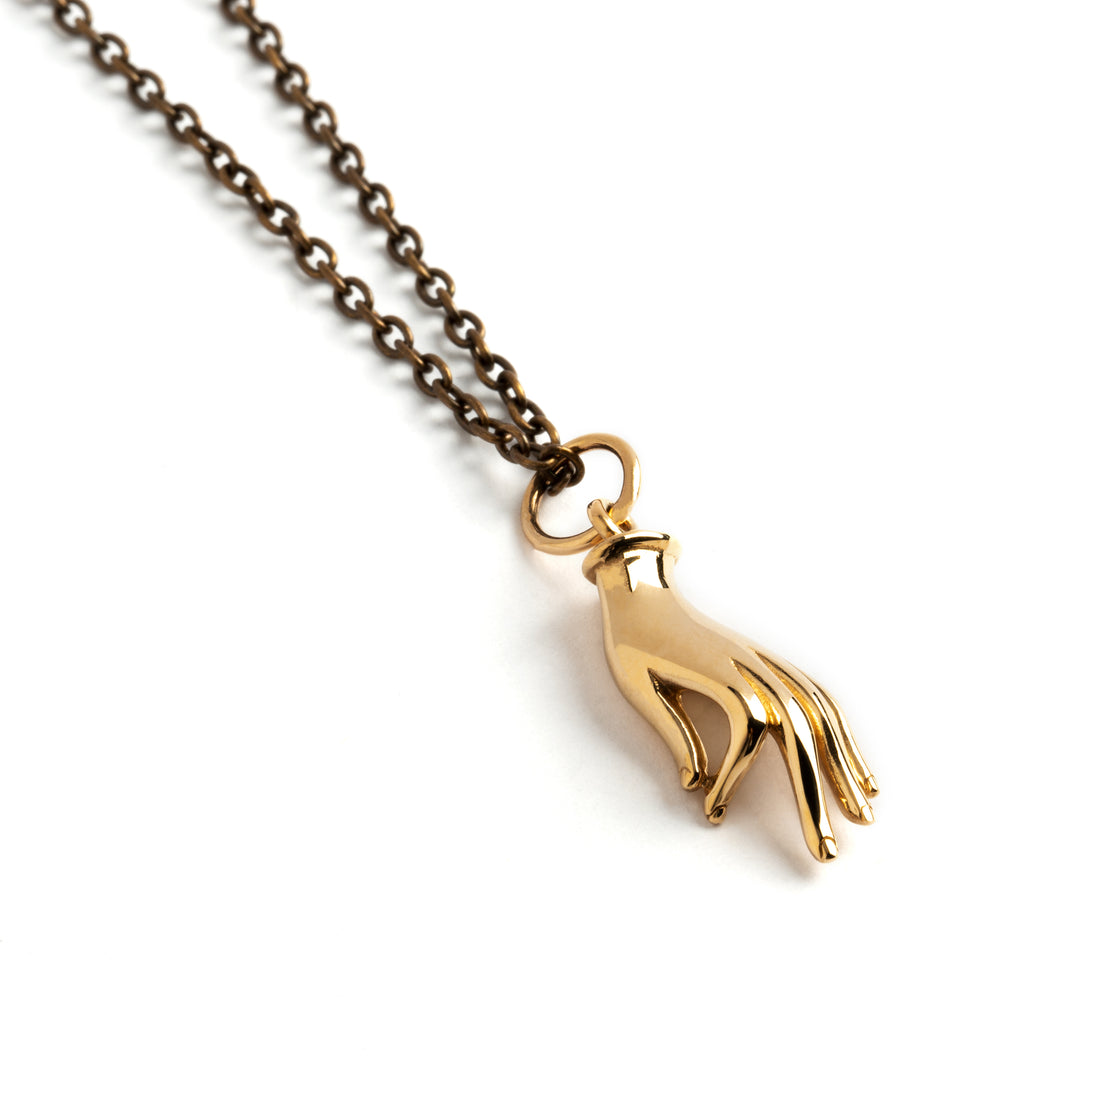 Bronze Mudra Charm necklace left side view